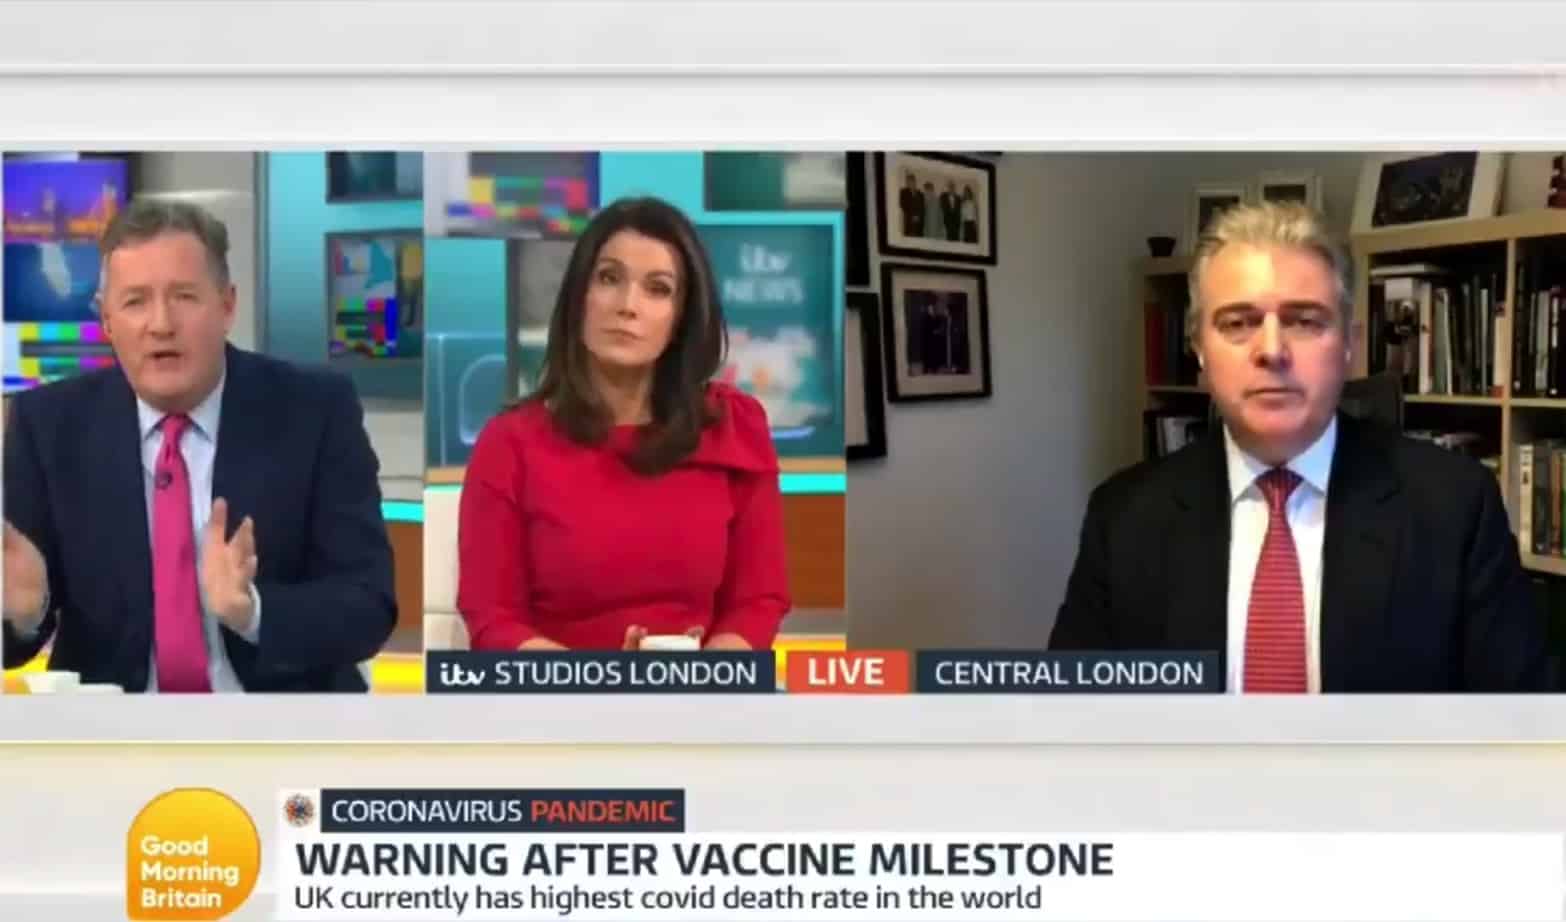 Morgan asks Brandon Lewis: Why do direct comparisons only apply to vaccinations?